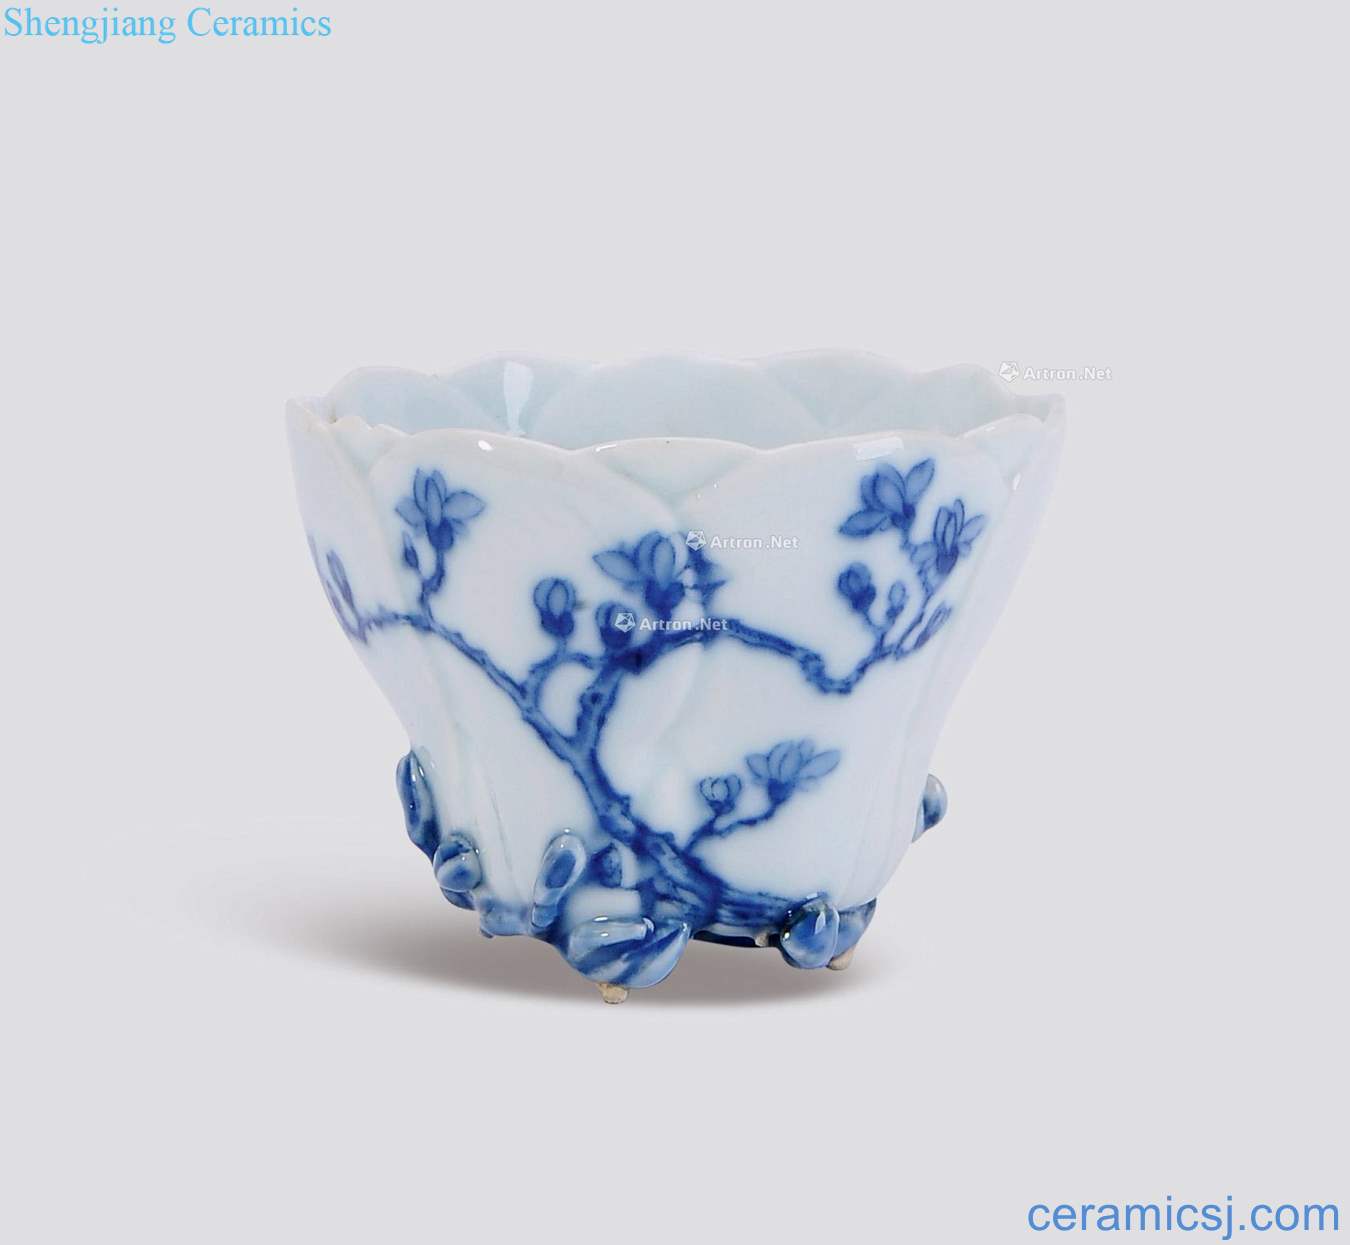 Qing dynasty in the 18th century porcelain figure flower-shaped cup "CV 18 riches and honour"